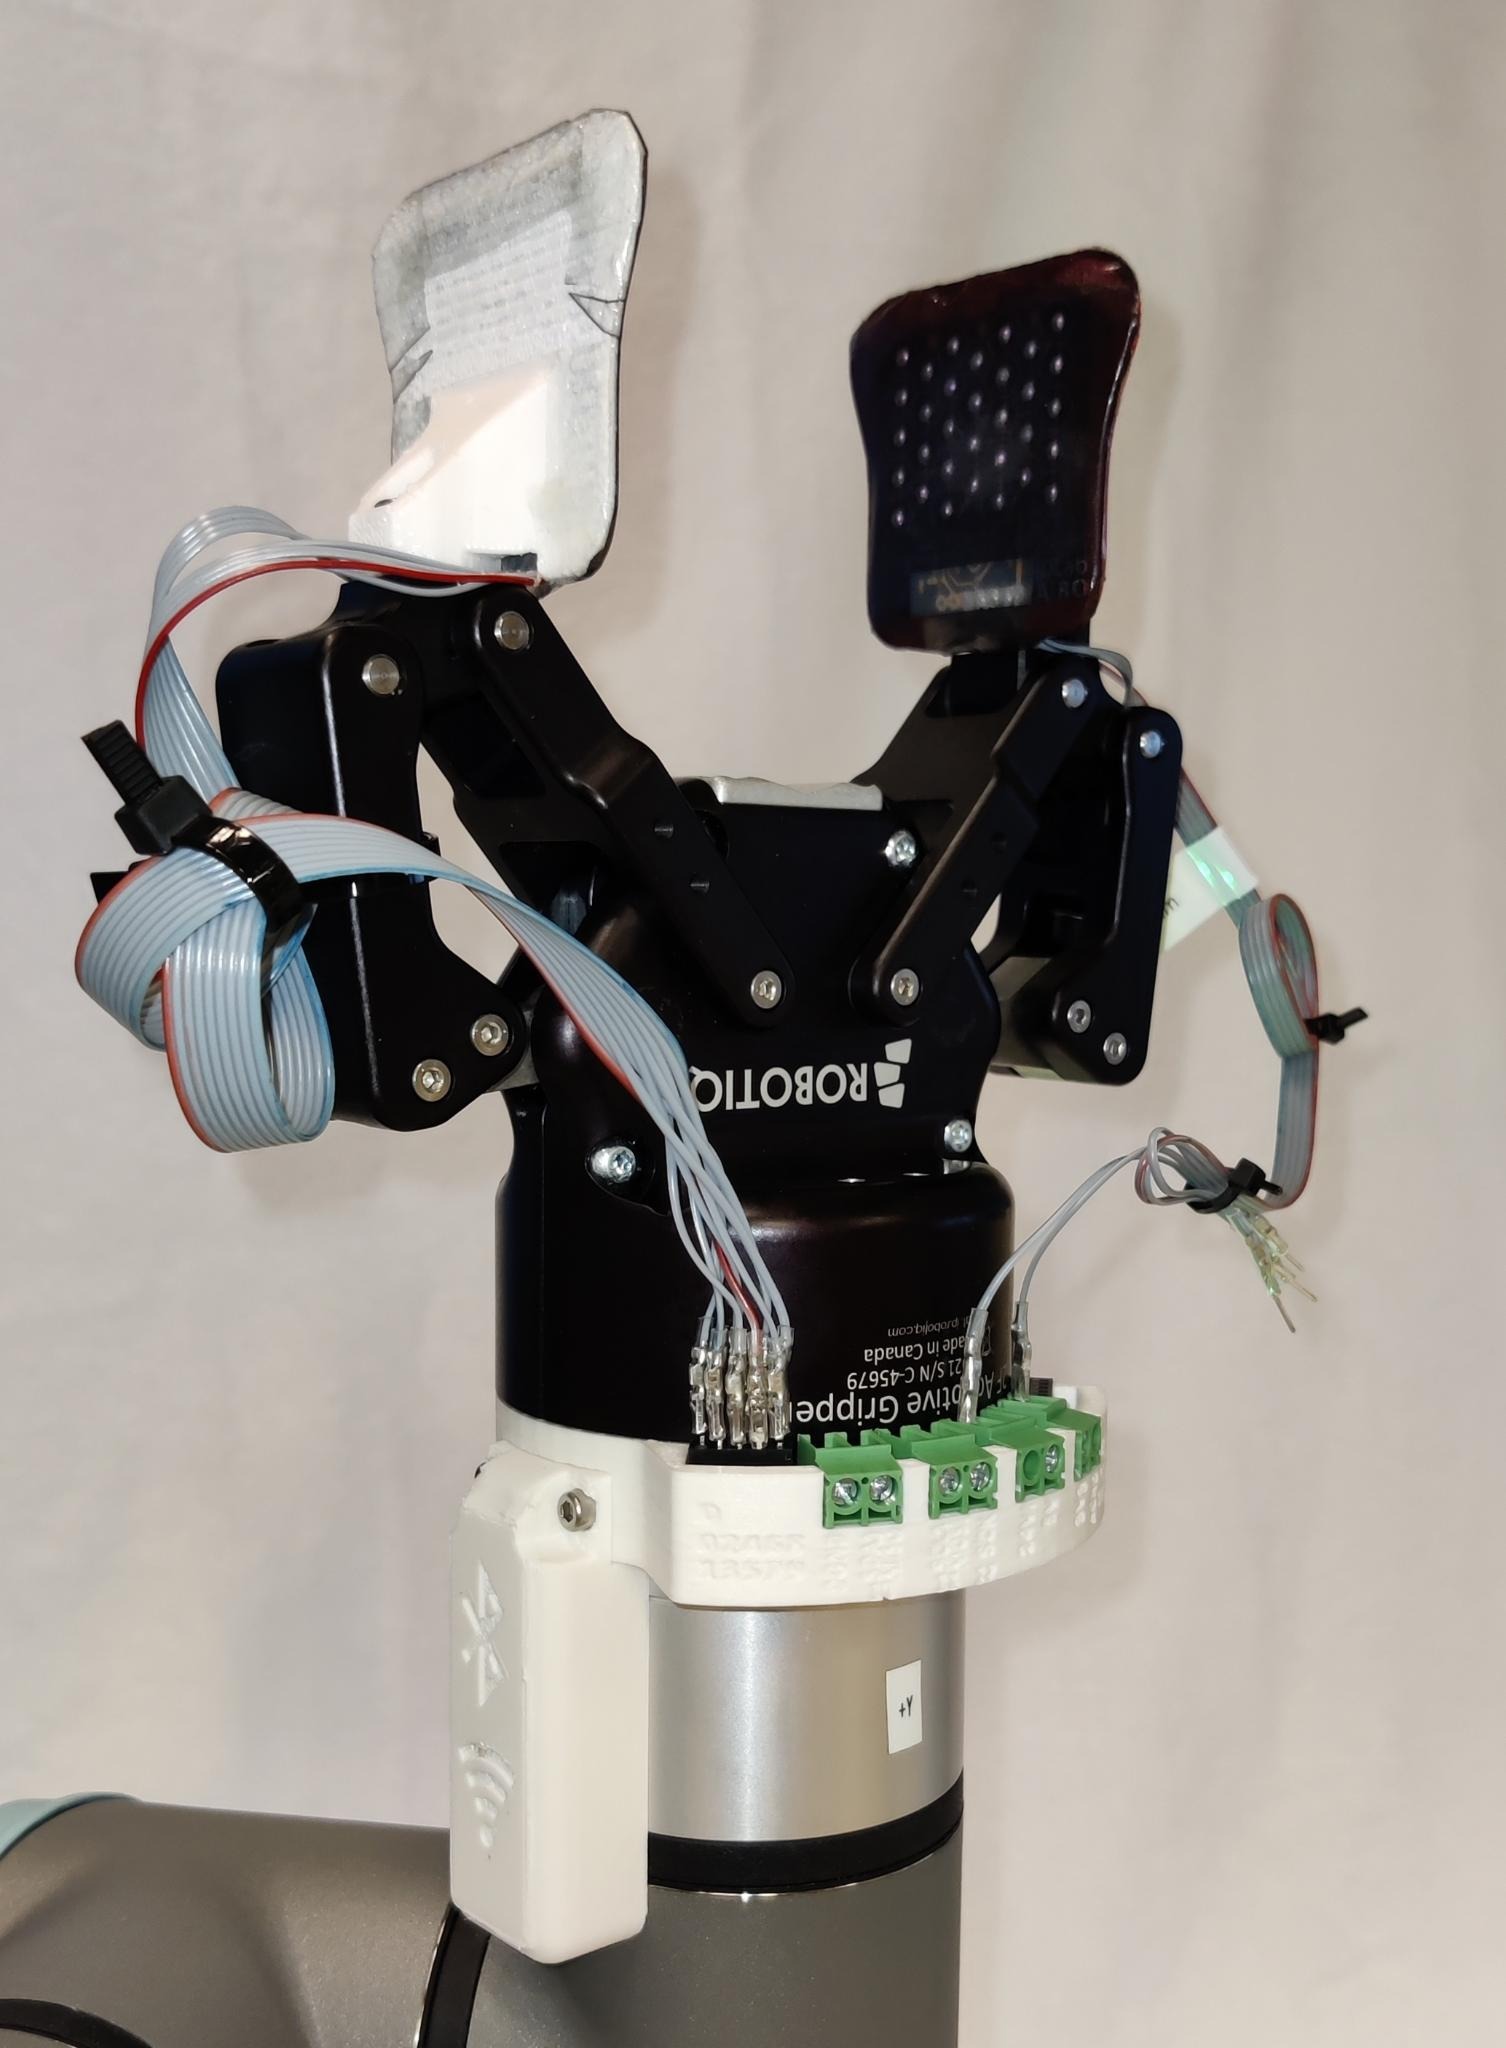 System integration of tactile fingertips on a Robotiq gripper and UR arm making use of the Halberd coupling.